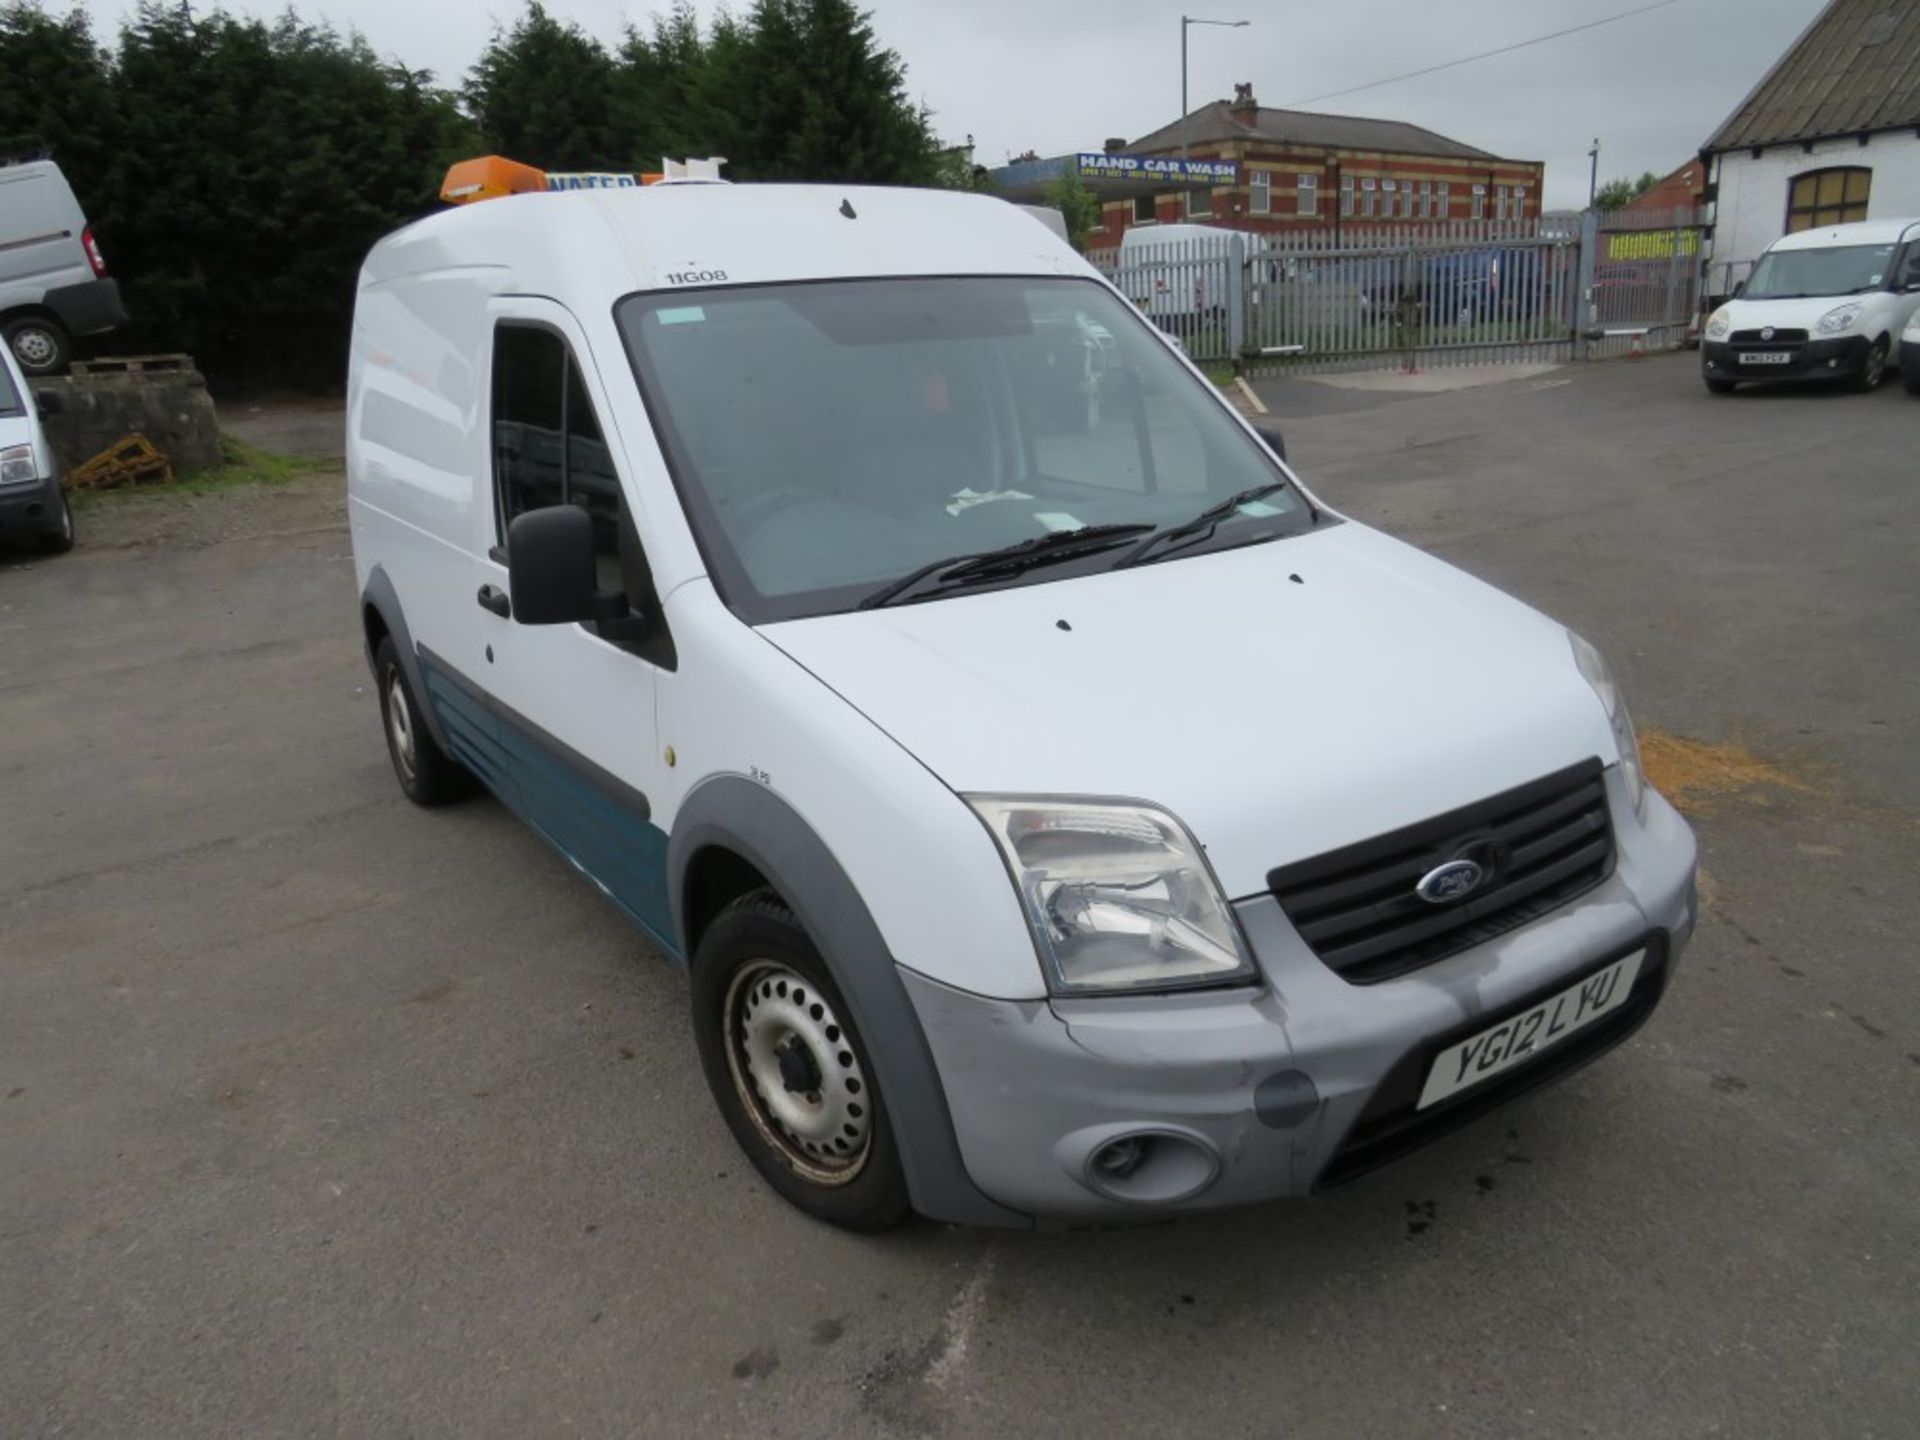 12 reg FORD TRANSIT CONNECT 90 T230 (DIRECT UNITED UTILITIES WATER) 1ST REG 03/12, TEST 10/20,